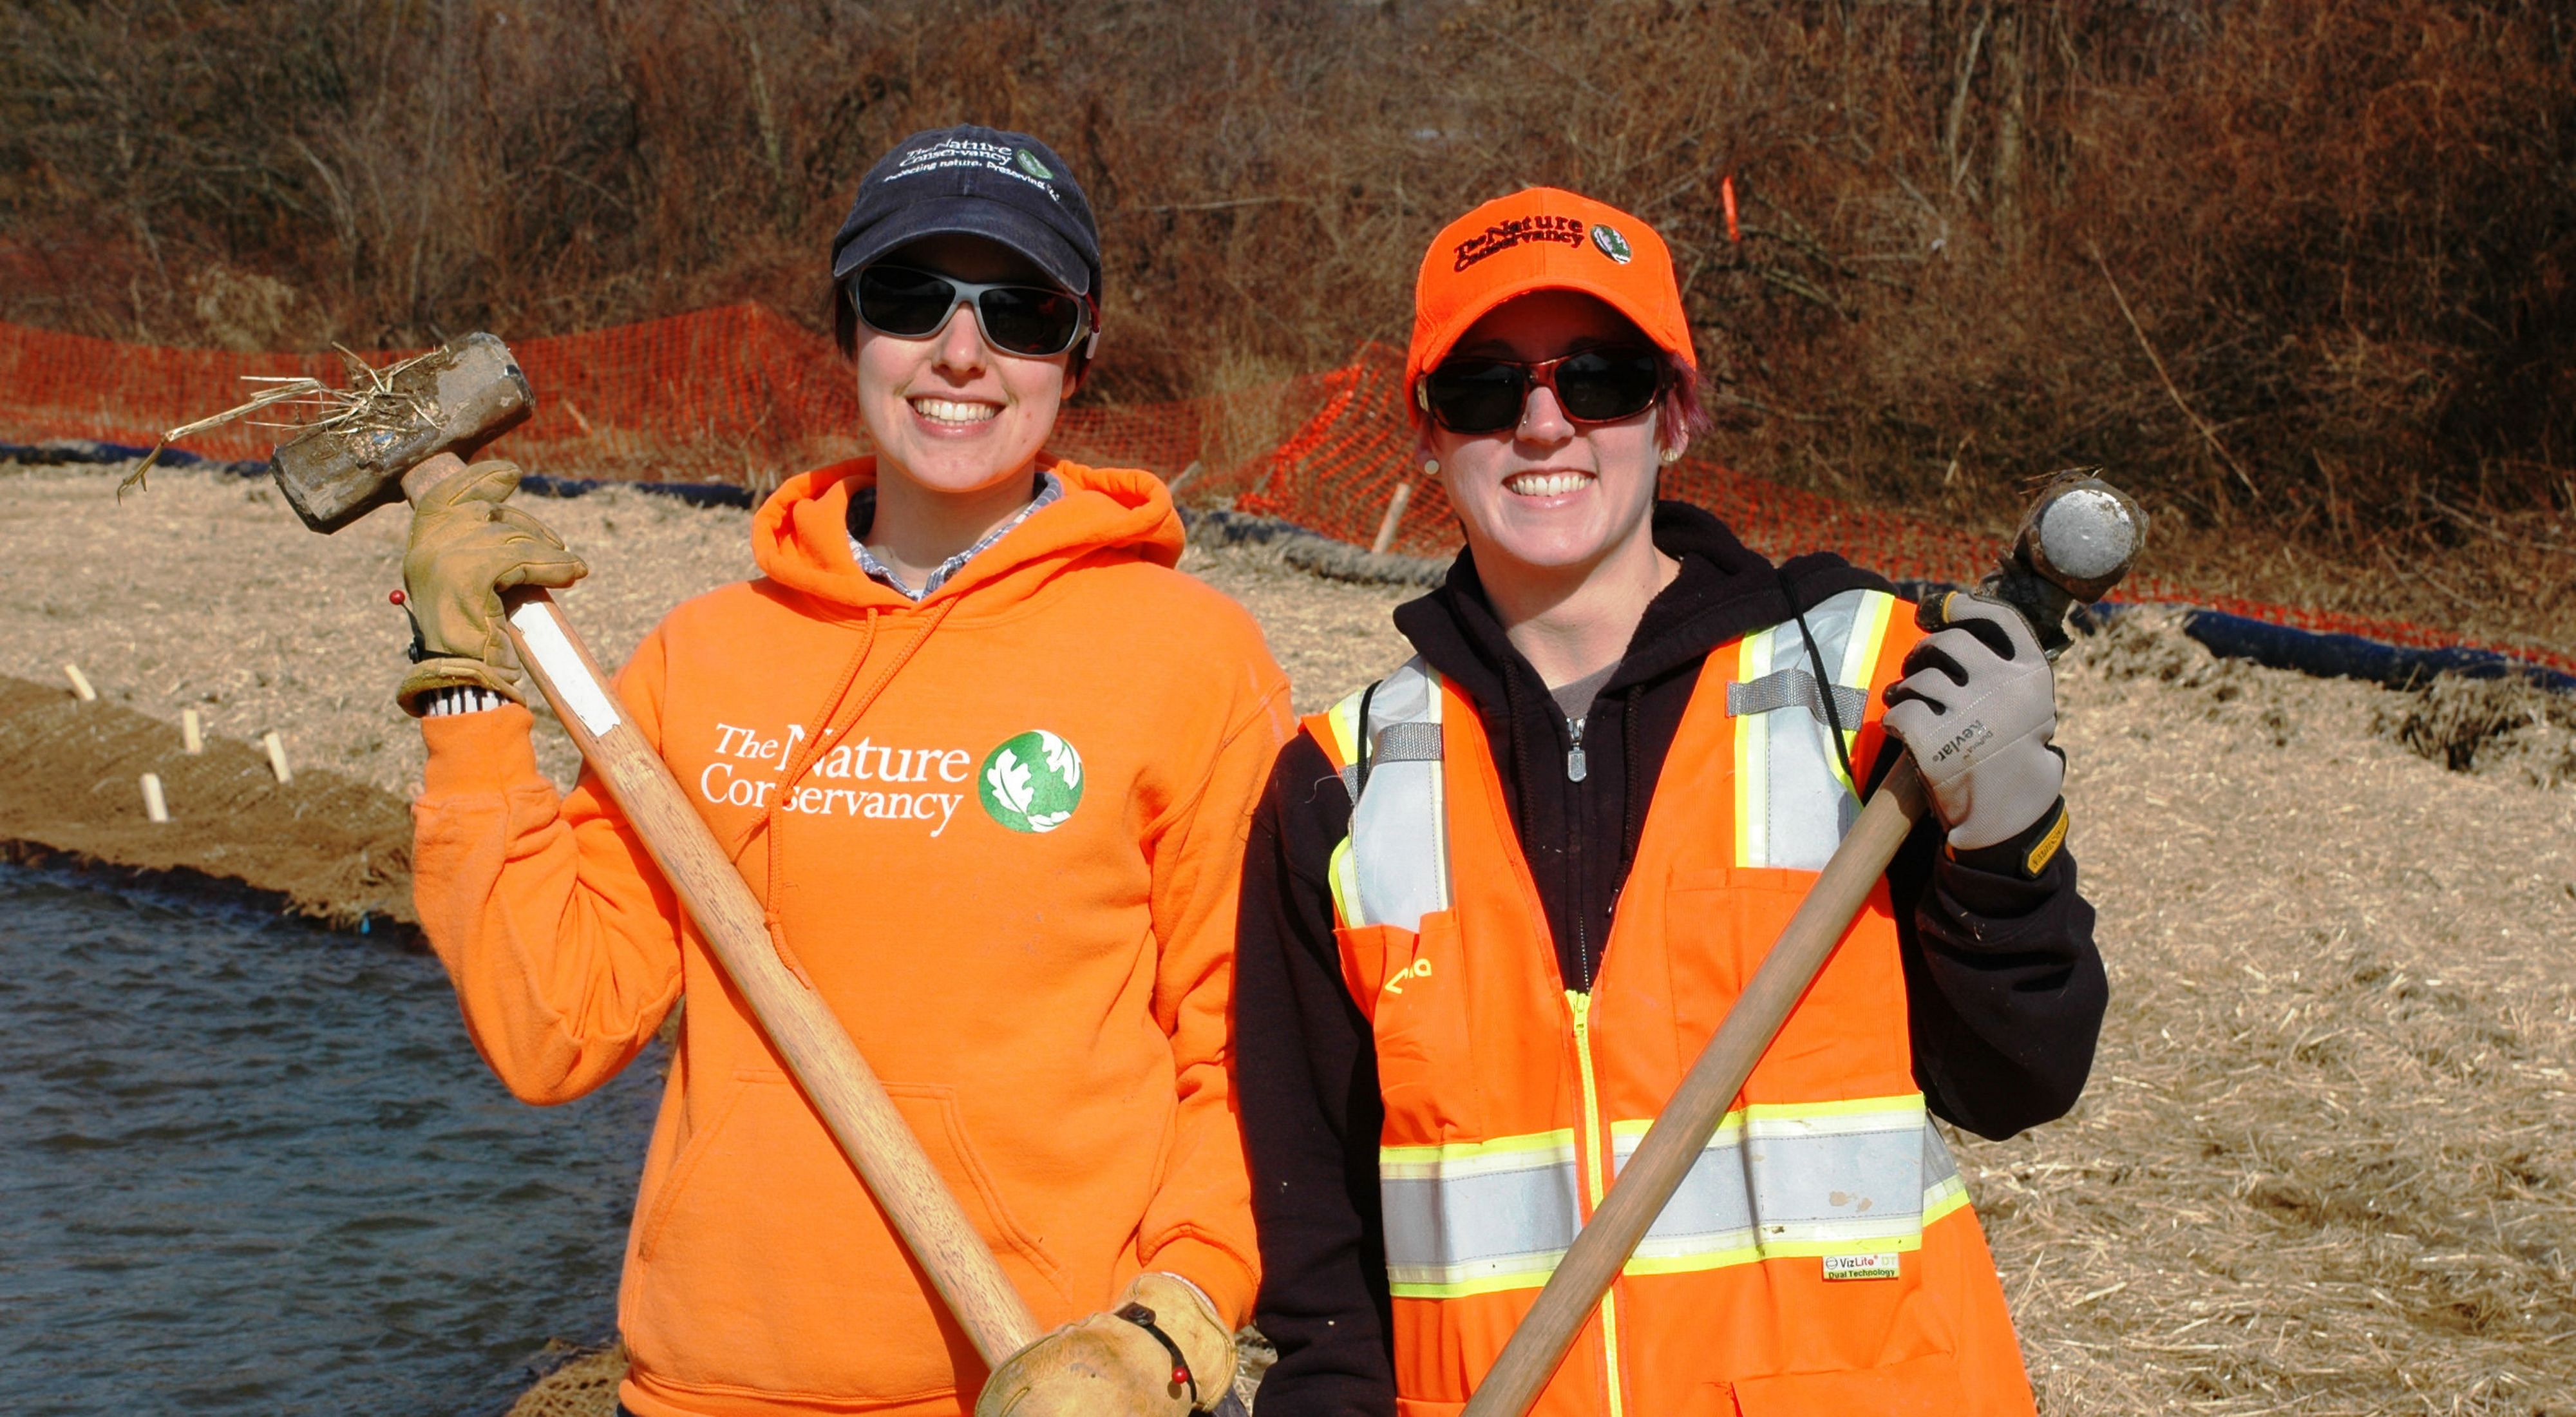 Two smiling women pose together during a volunteer event. They are both wearing orange hats and vests and holding sledge hammers. Sedge and straw cover the ground behind them.